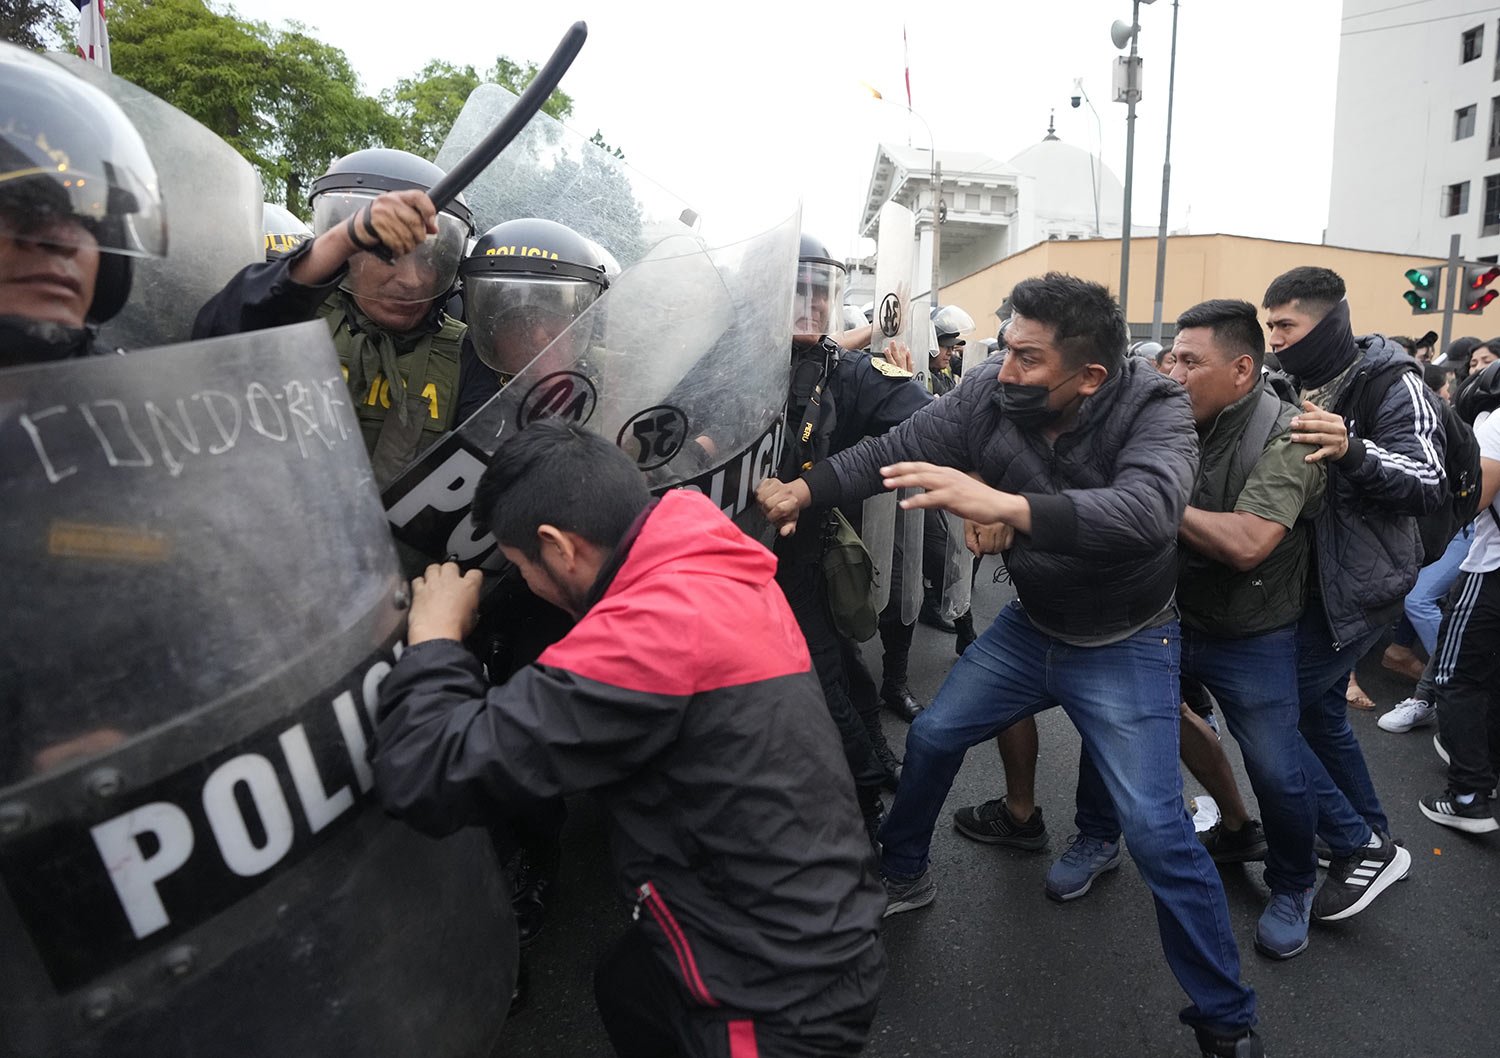  Supporters of ousted President Pedro Castillo clash with police during a protest in Lima, Peru, Thursday, Dec. 8, 2022. (AP Photo/Fernando Vergara) 